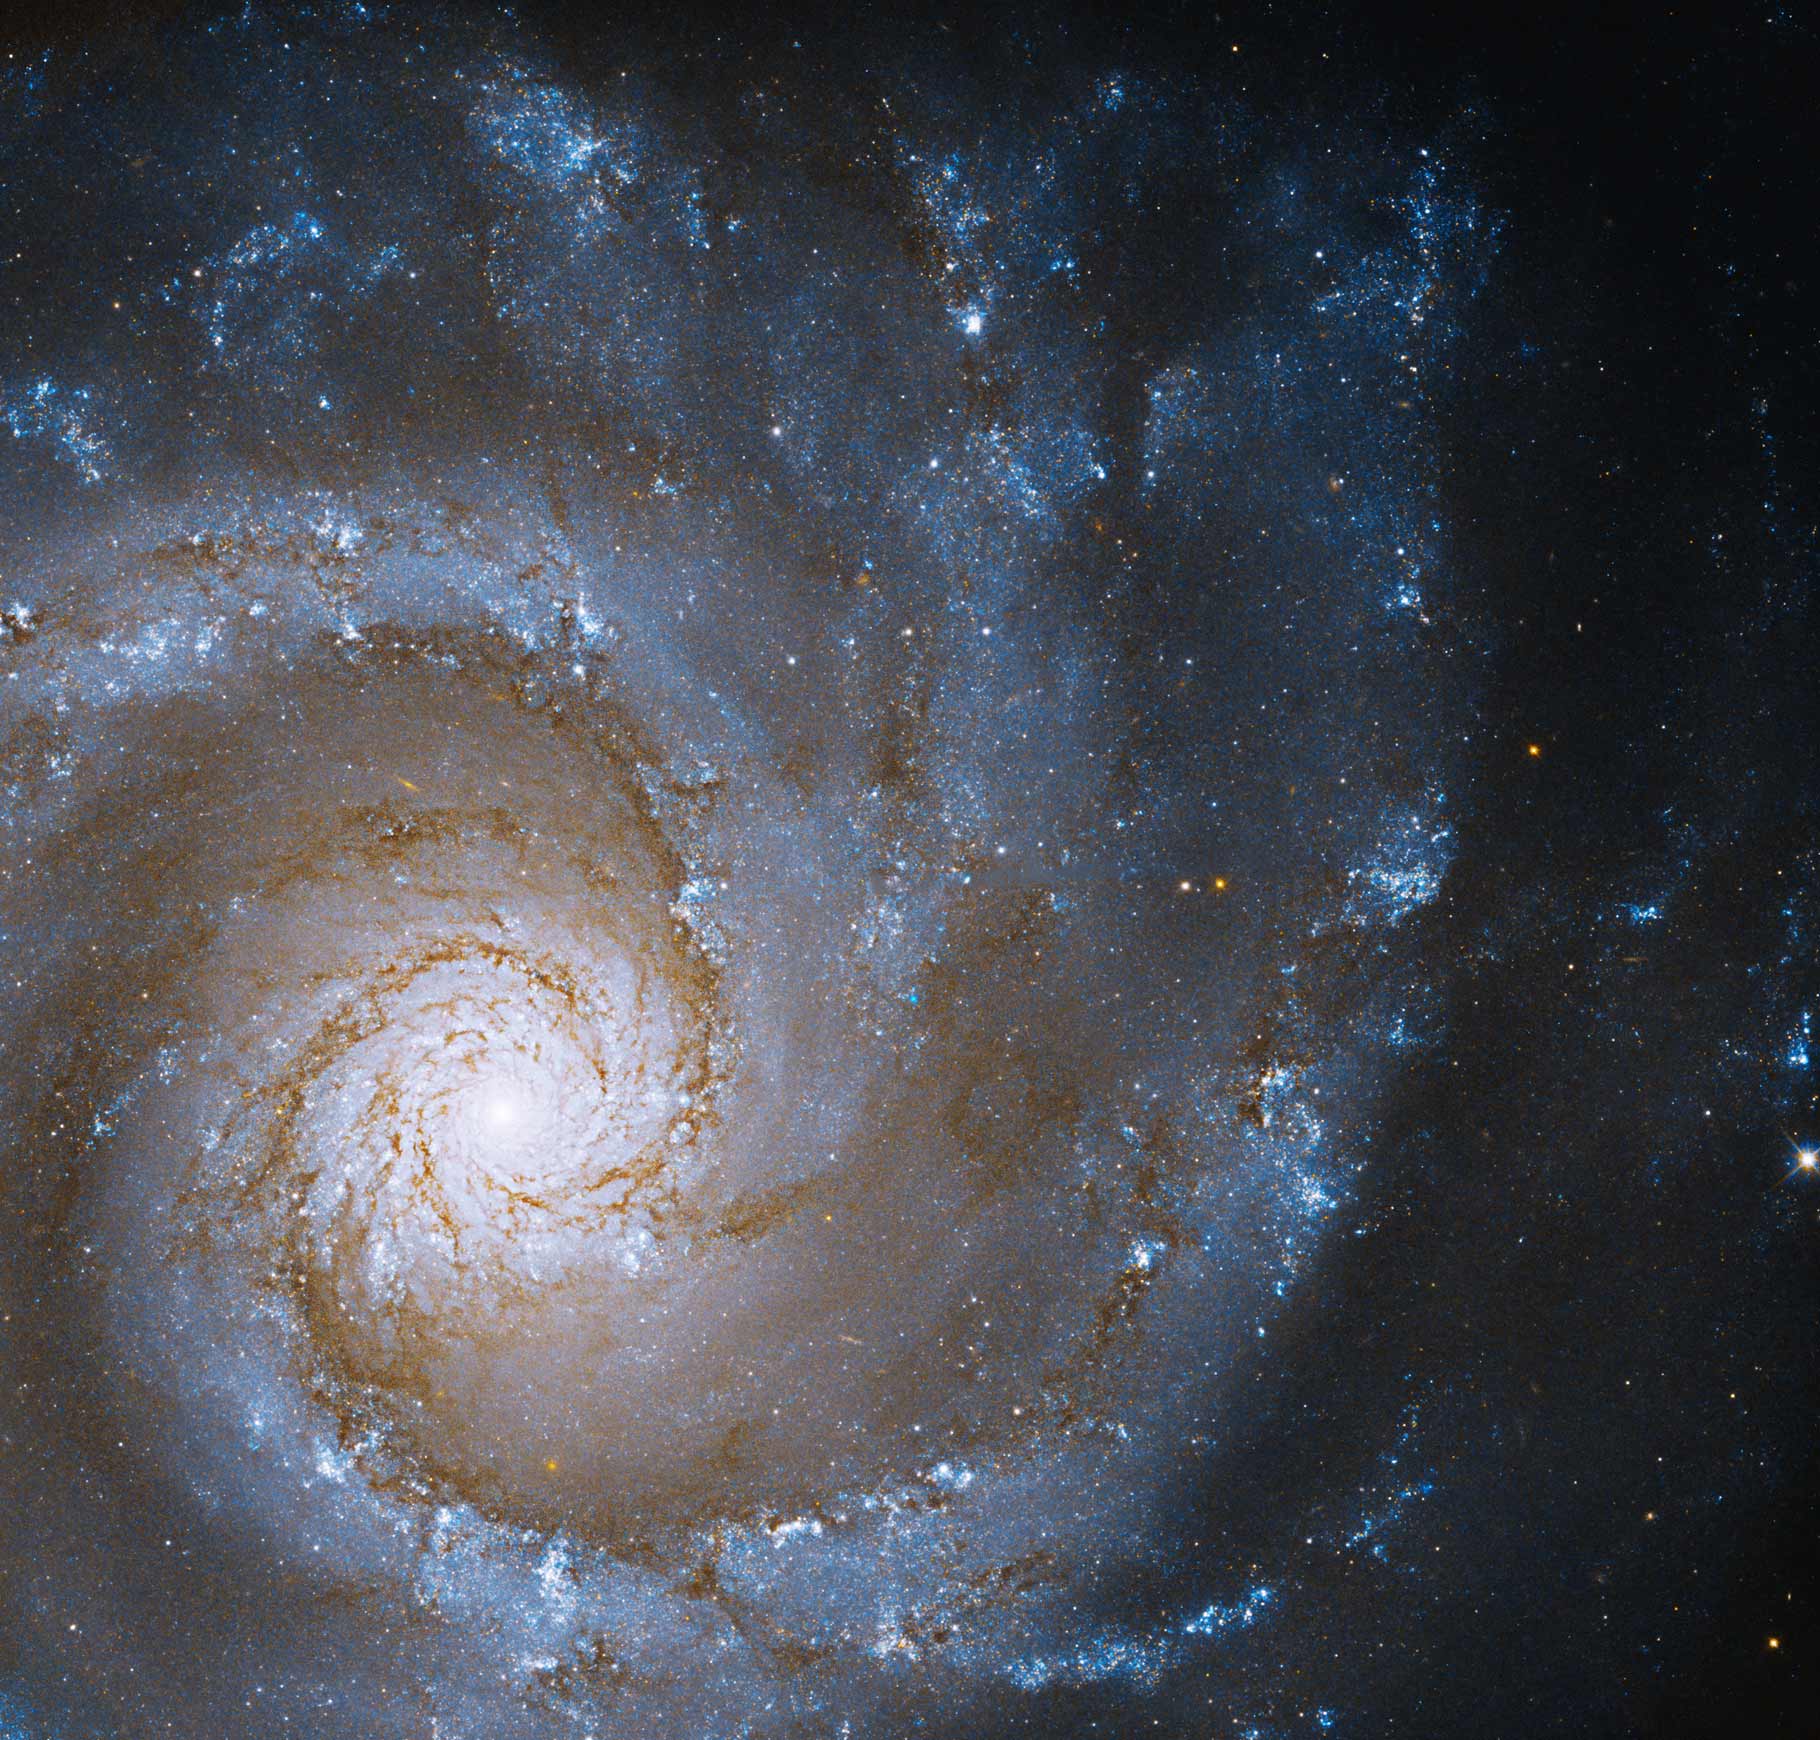 The Hubble Space Telescope spotted this spectacular view of the <a href="https://www.cnn.com/2022/05/31/world/hubble-grand-spiral-galaxy-scn/index.html" target="_blank">grand design spiral galaxy</a> NGC 3631. The head-on view, released on May 26, displays arms that seem to wrap around the galaxy&#39;s structure.